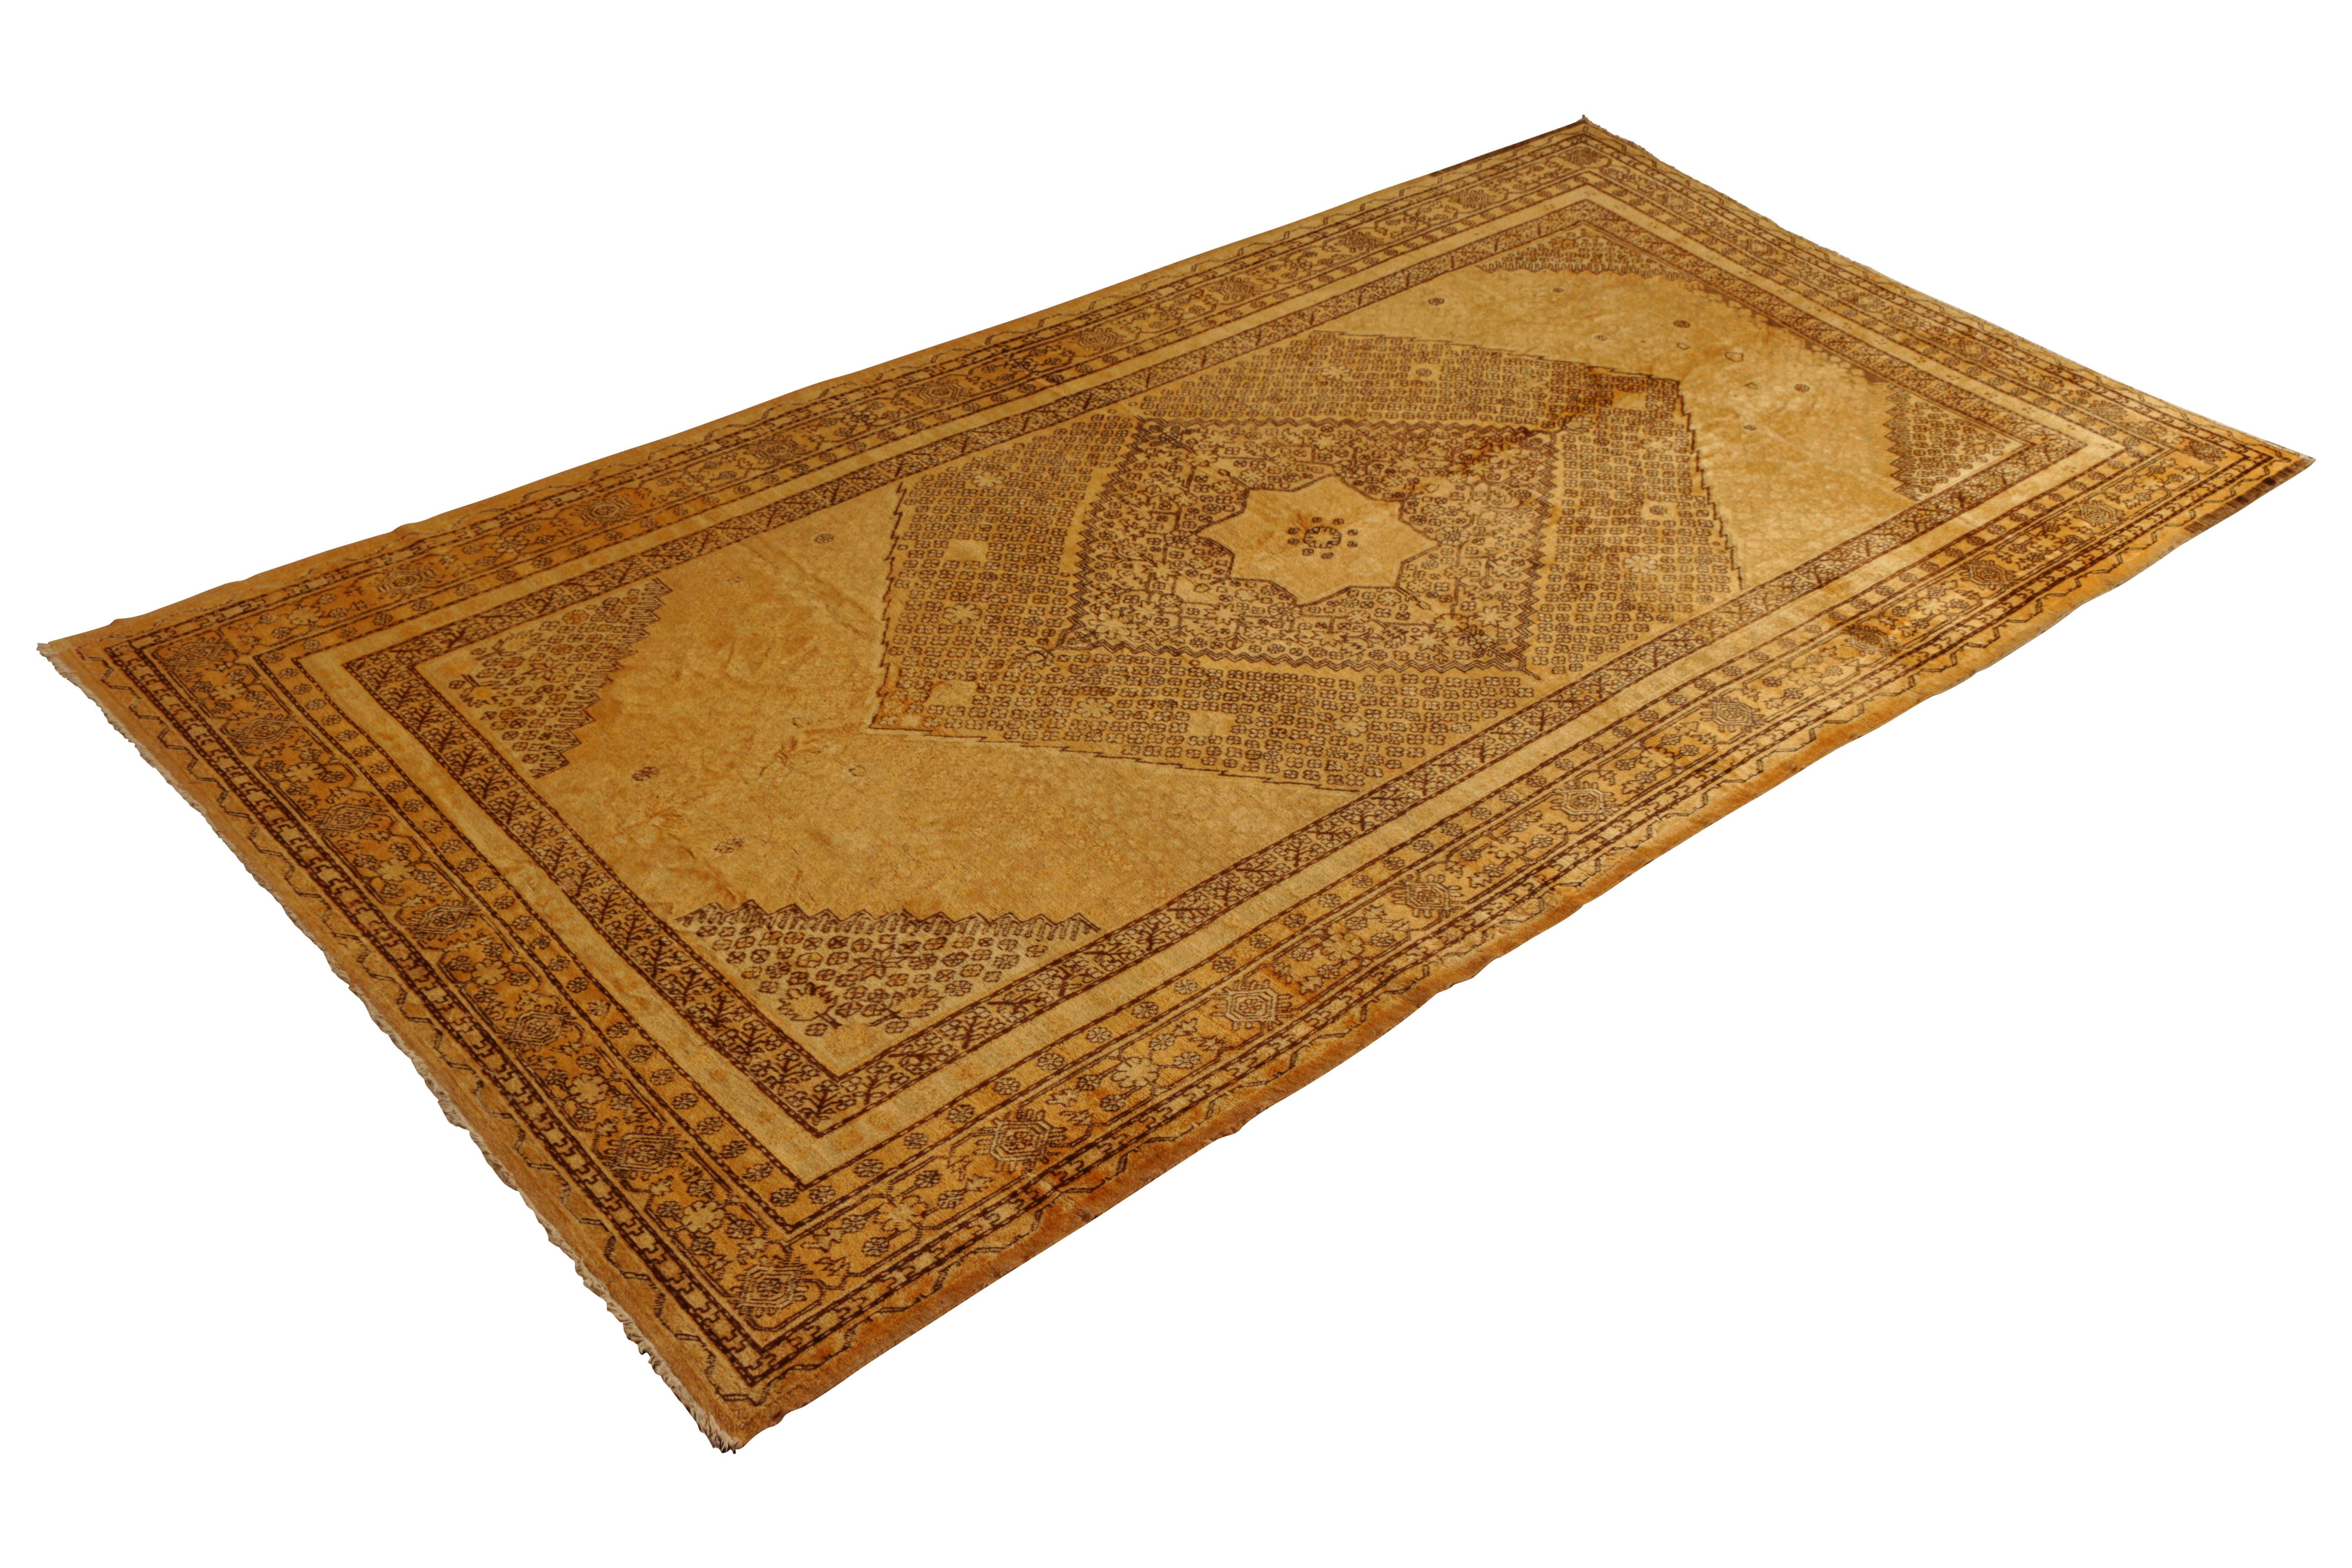 Hand knotted in wool originating from East Turkestan circa 1890-1900, this antique rug connotes a classic Khotan rug design with a Classic approach to transitional colorway celebrated in this Oriental rug family. The spacious 6’9 x 12’6 size and the